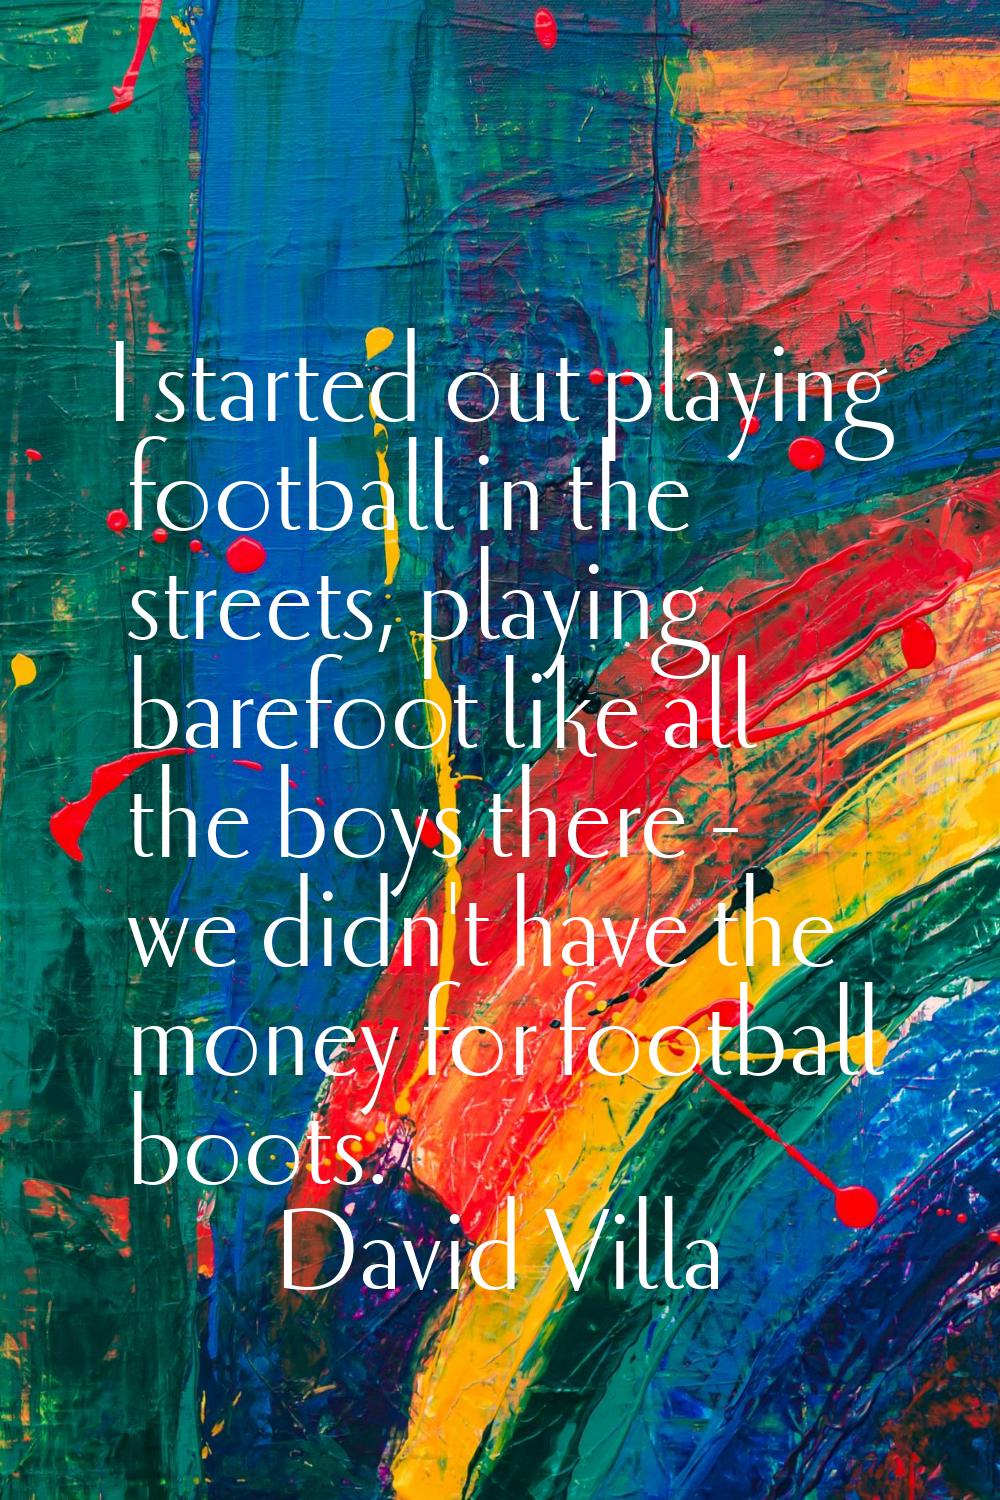 I started out playing football in the streets, playing barefoot like all the boys there - we didn't